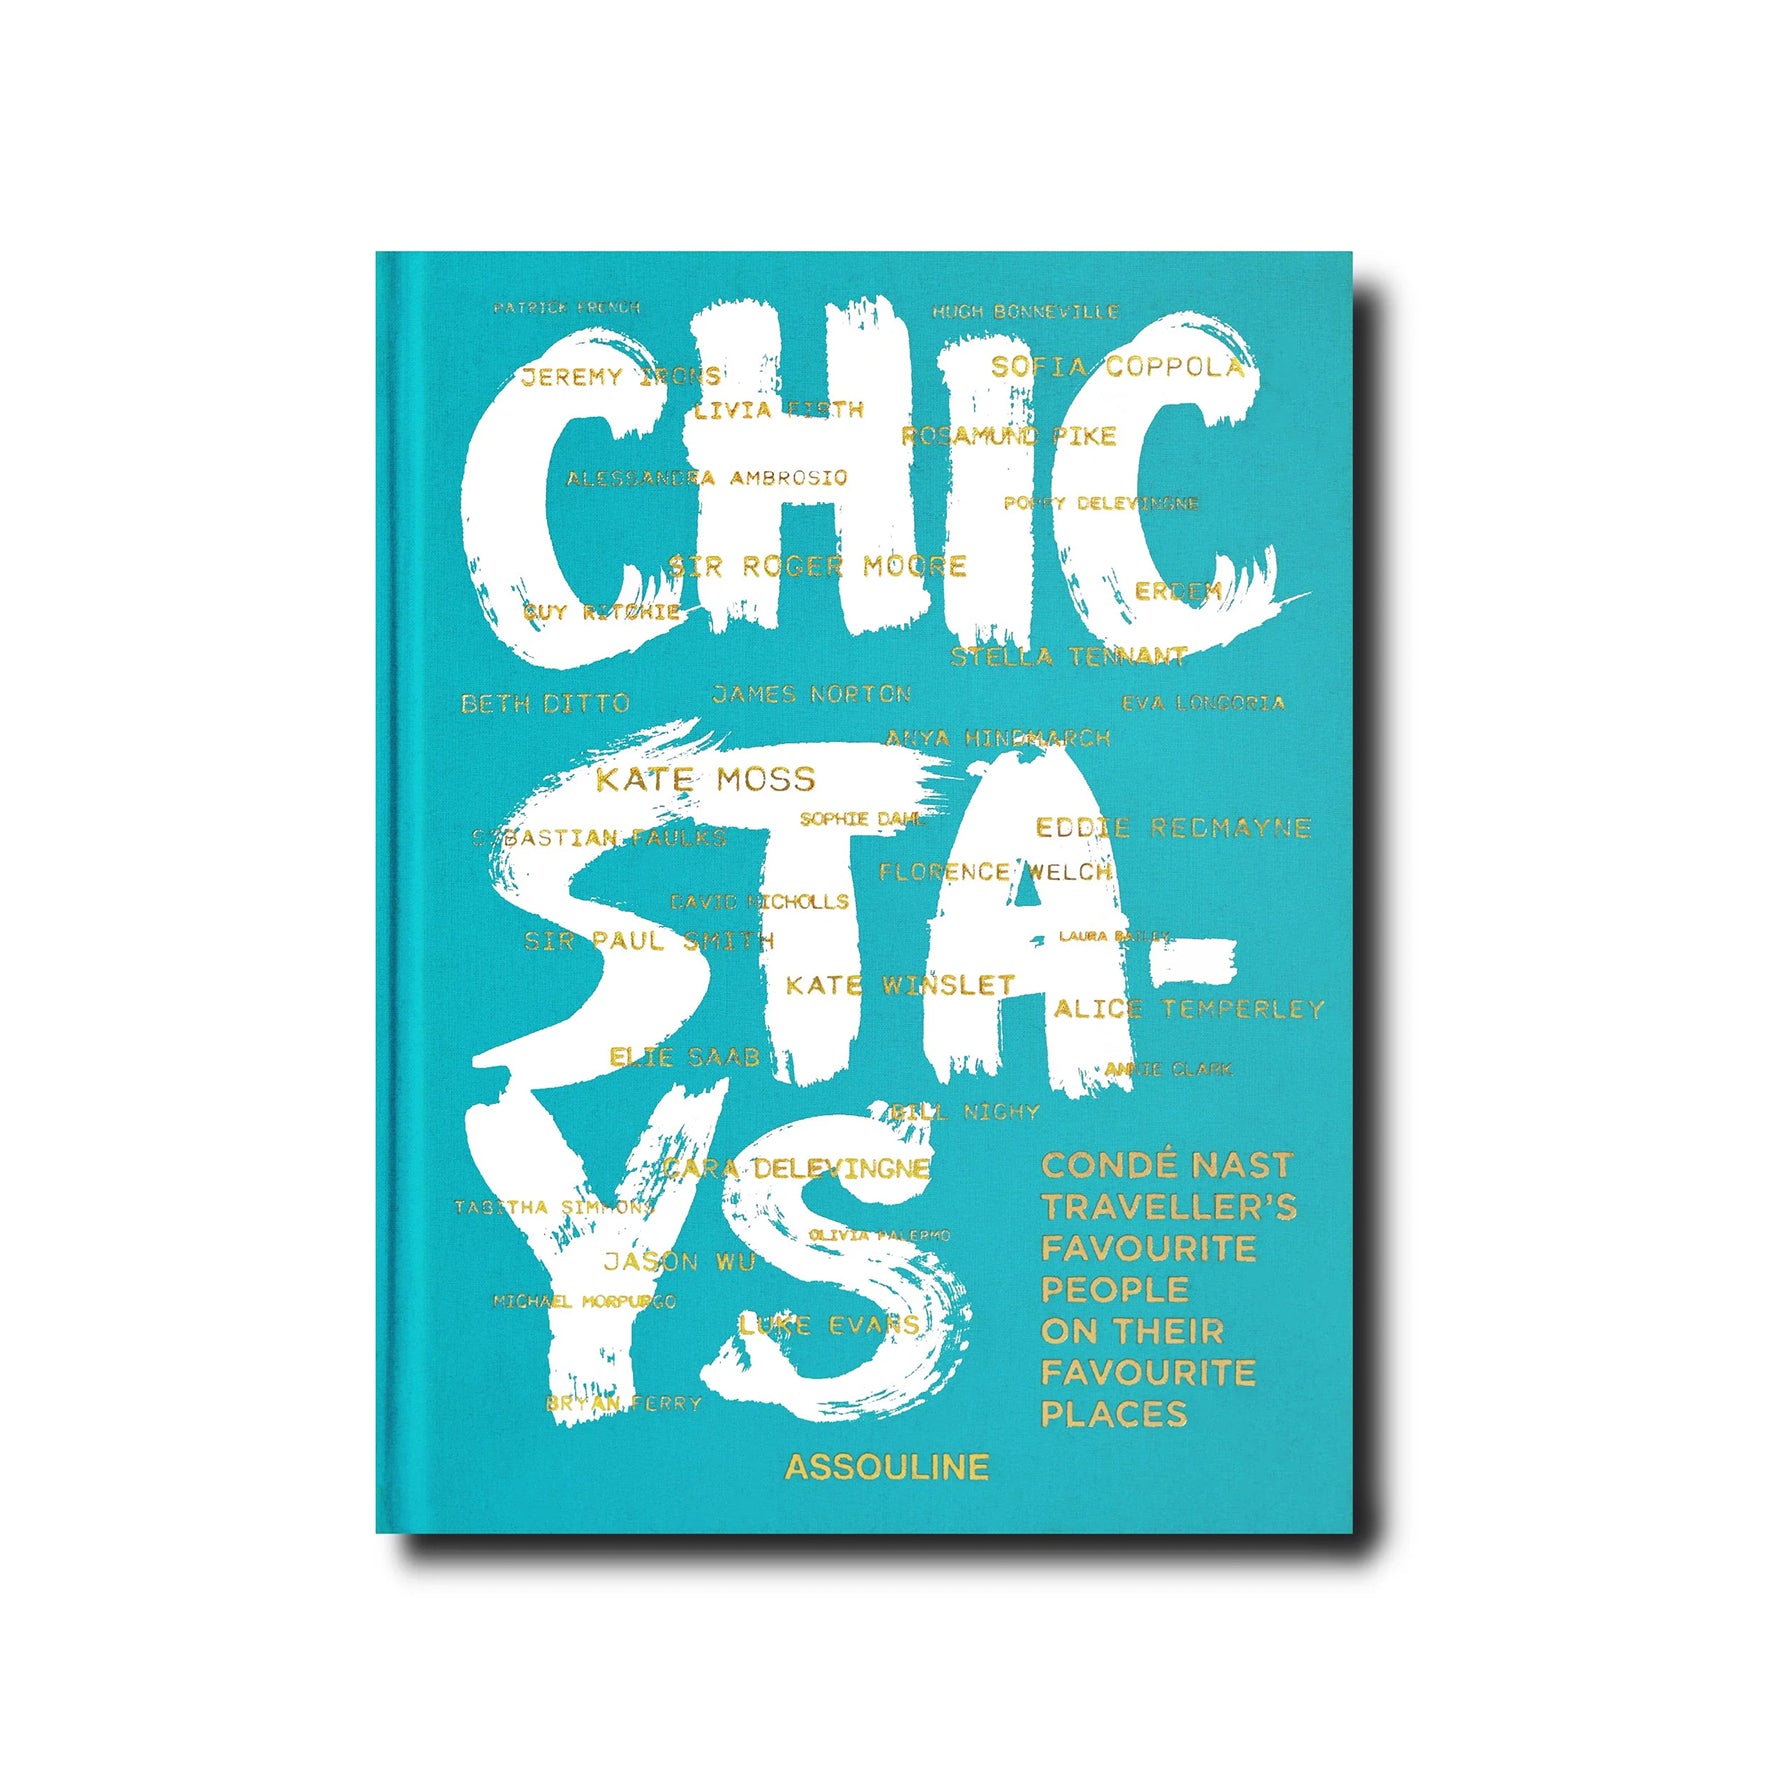 Chic Stays by Assouline